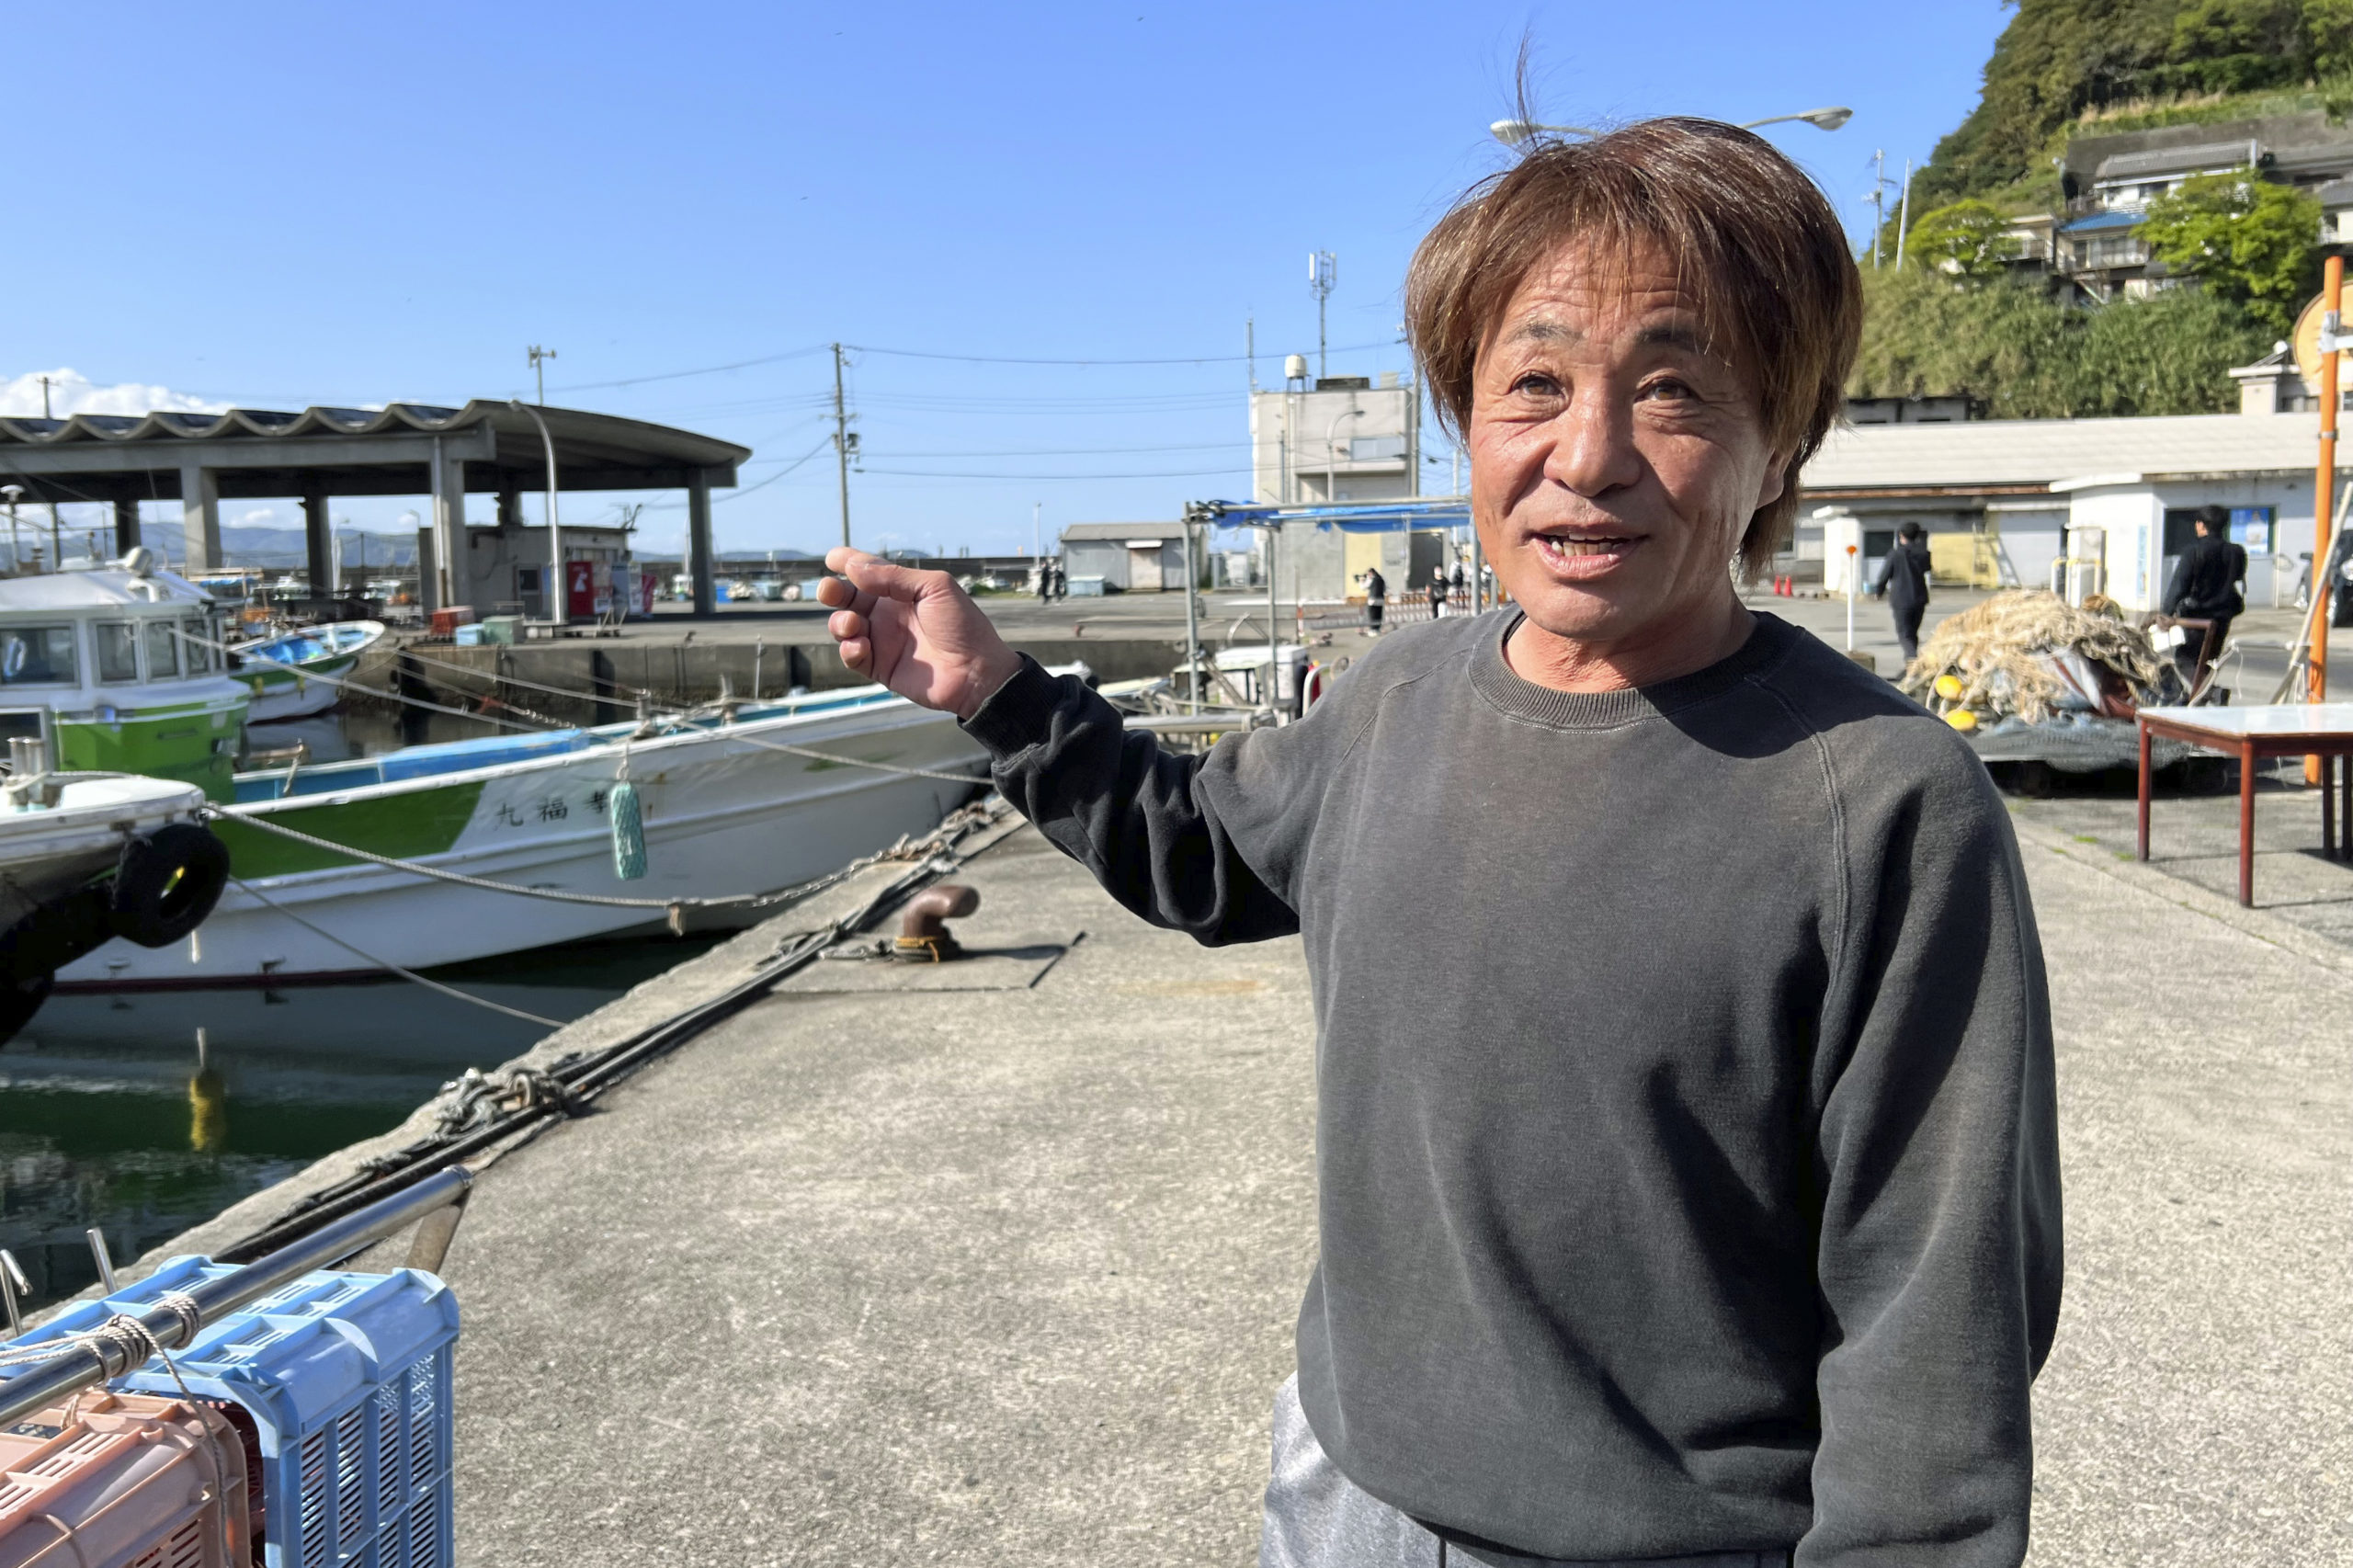 Masaki Nishide, a fisherman at the Satsugasaki port, describes the explosion scene on Sunday at an election campaign event Prime Minister Fumio Kishida attended and narrowly escaped in Wakayma, Japan.